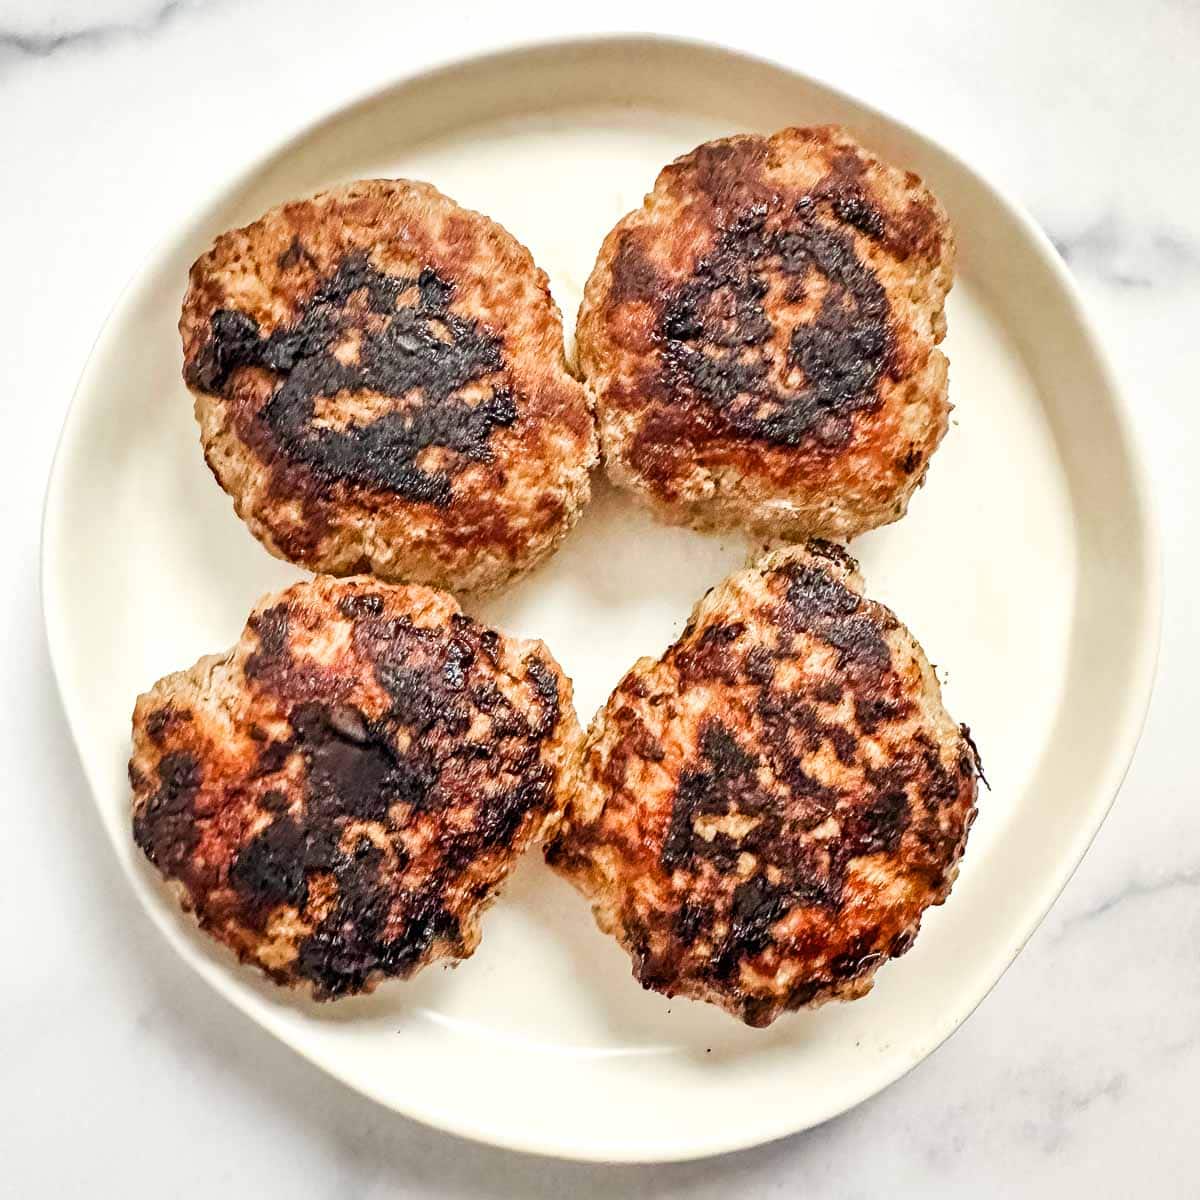 Four cooked turkey burger patties on a white plate.